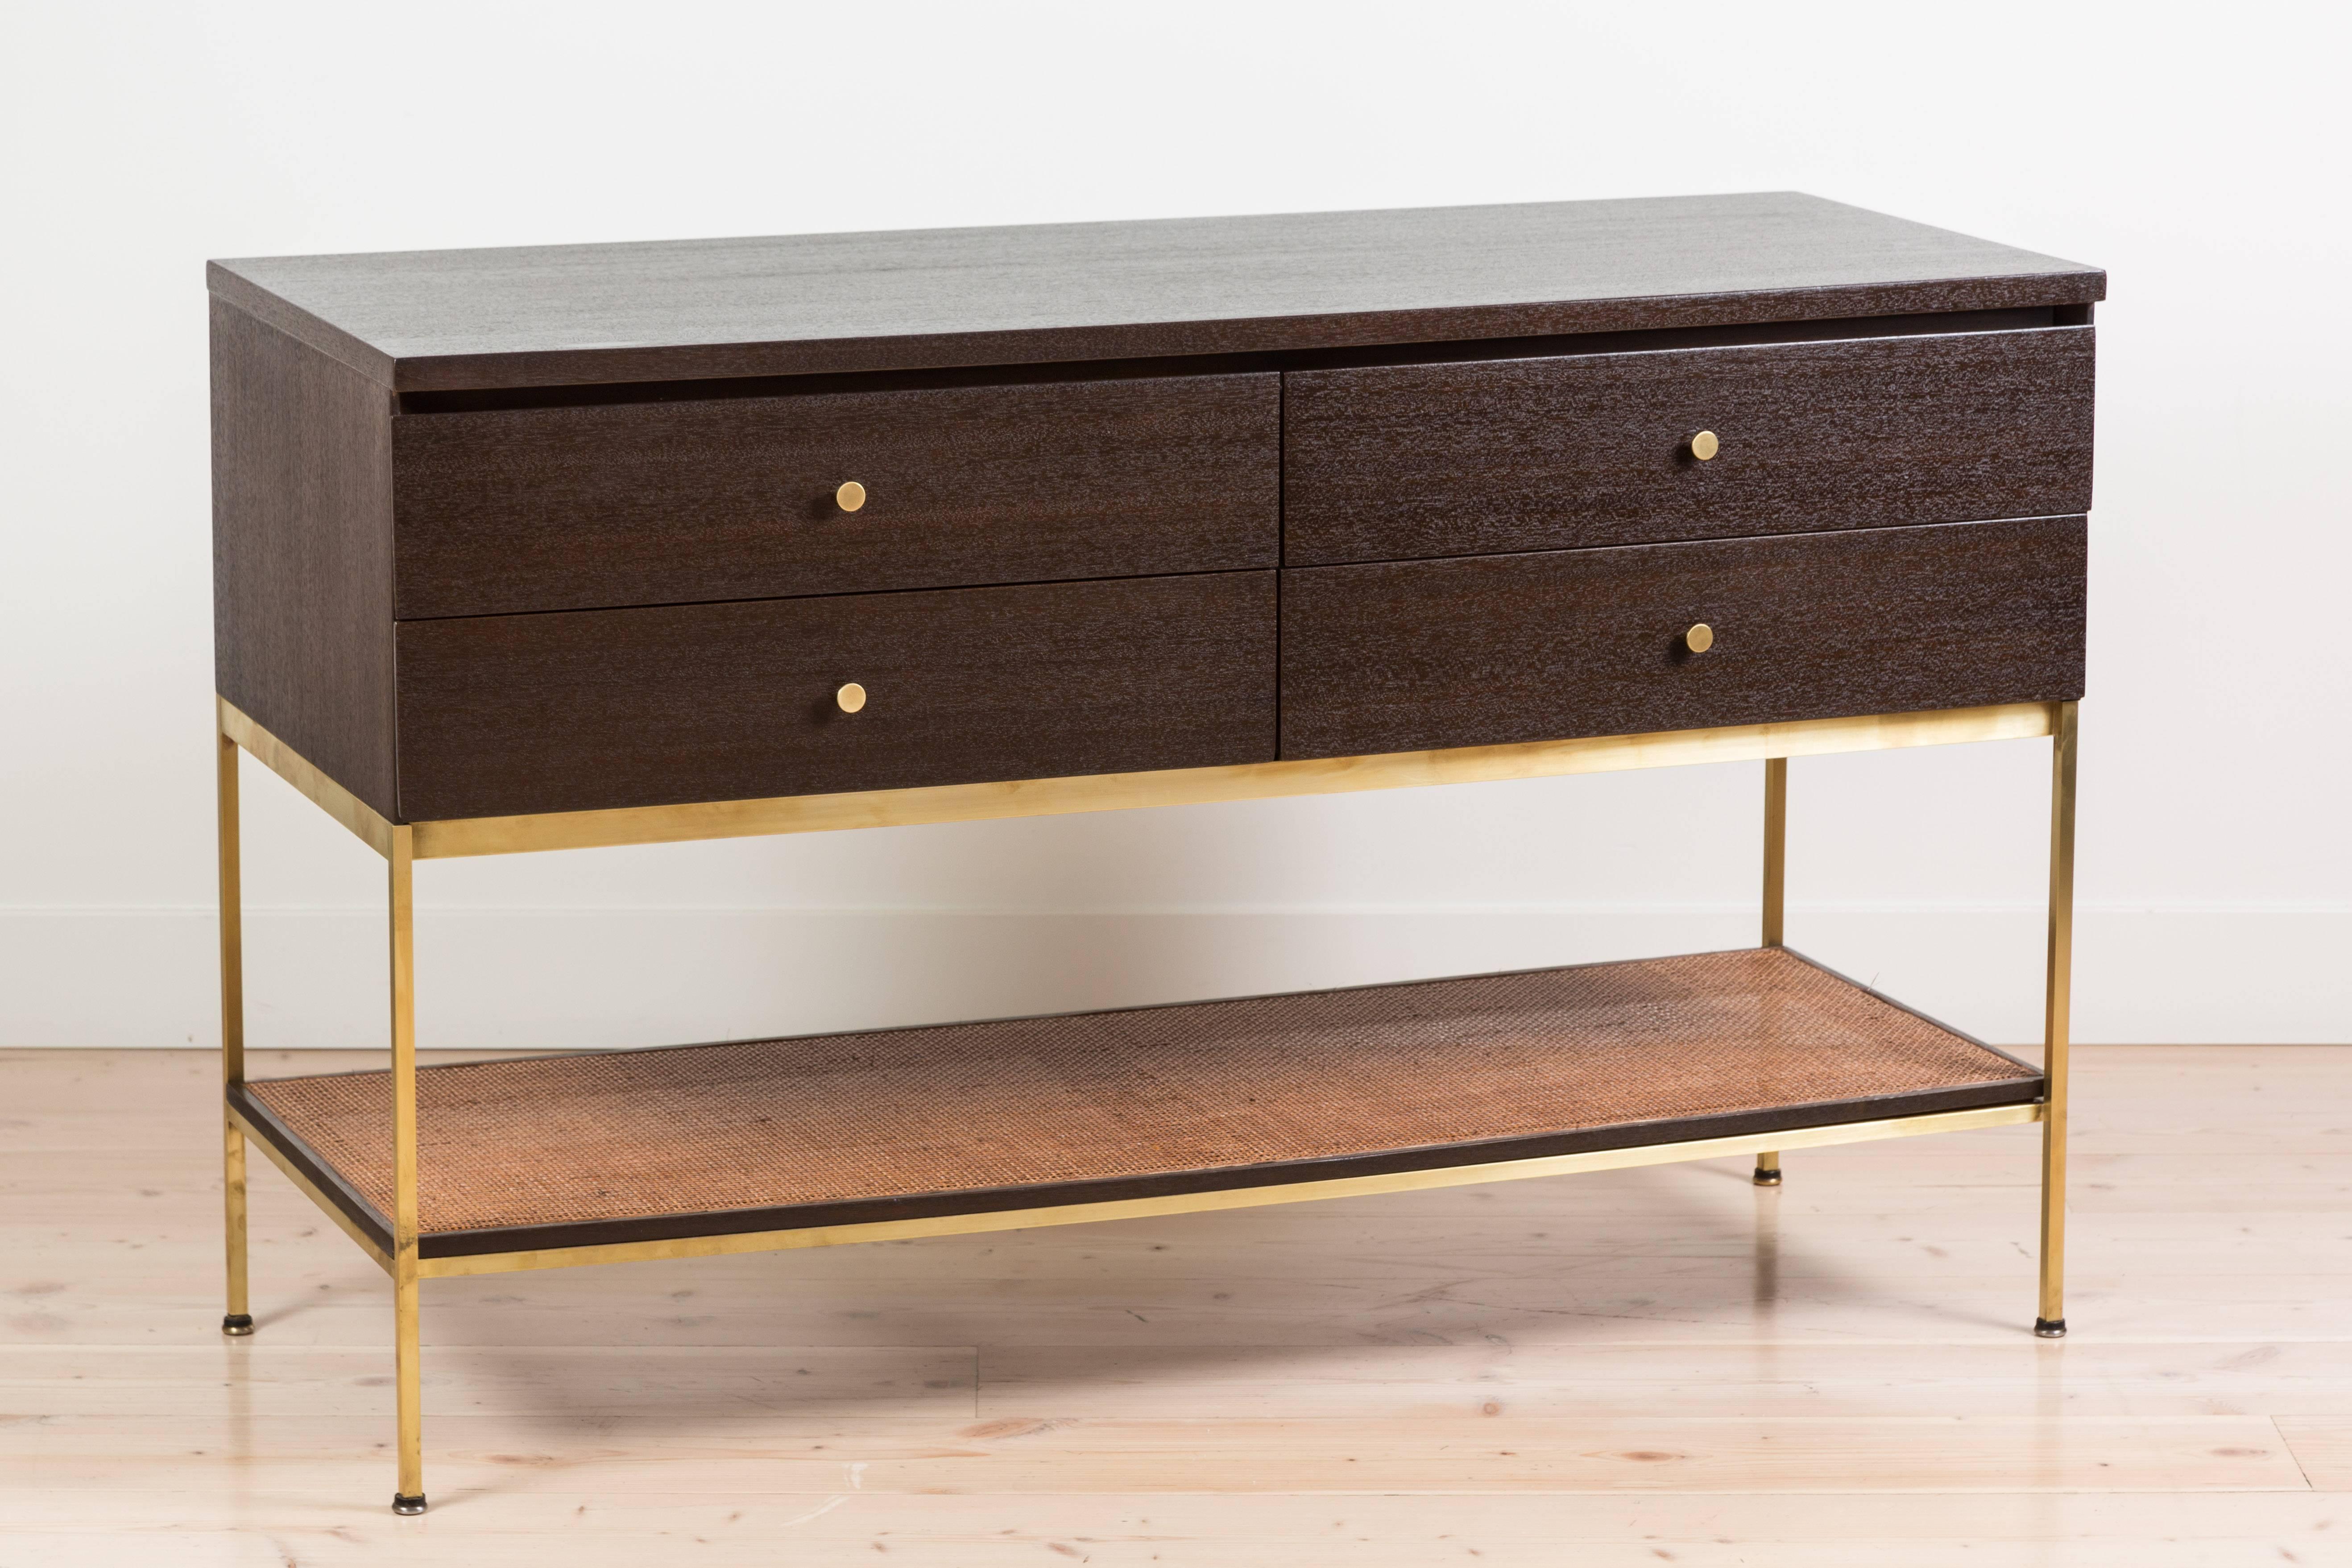 Credenza by Paul McCobb for Calvin.